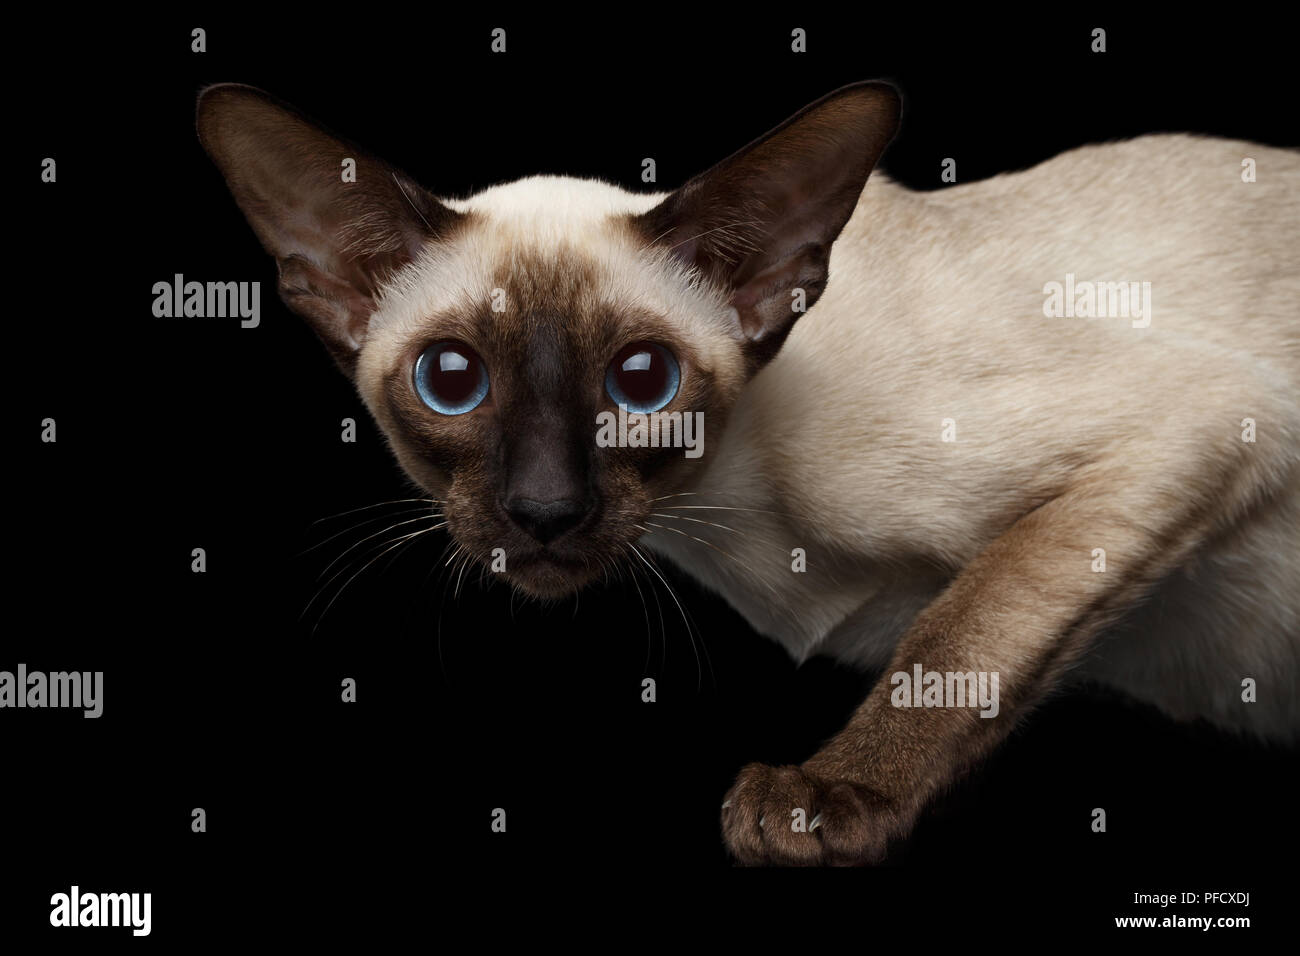 Close-up portrait of frightened Oriental Shorthair Kitty with huge blue eyes looking at camera, siamese fur, isolated black background, profile view Stock Photo